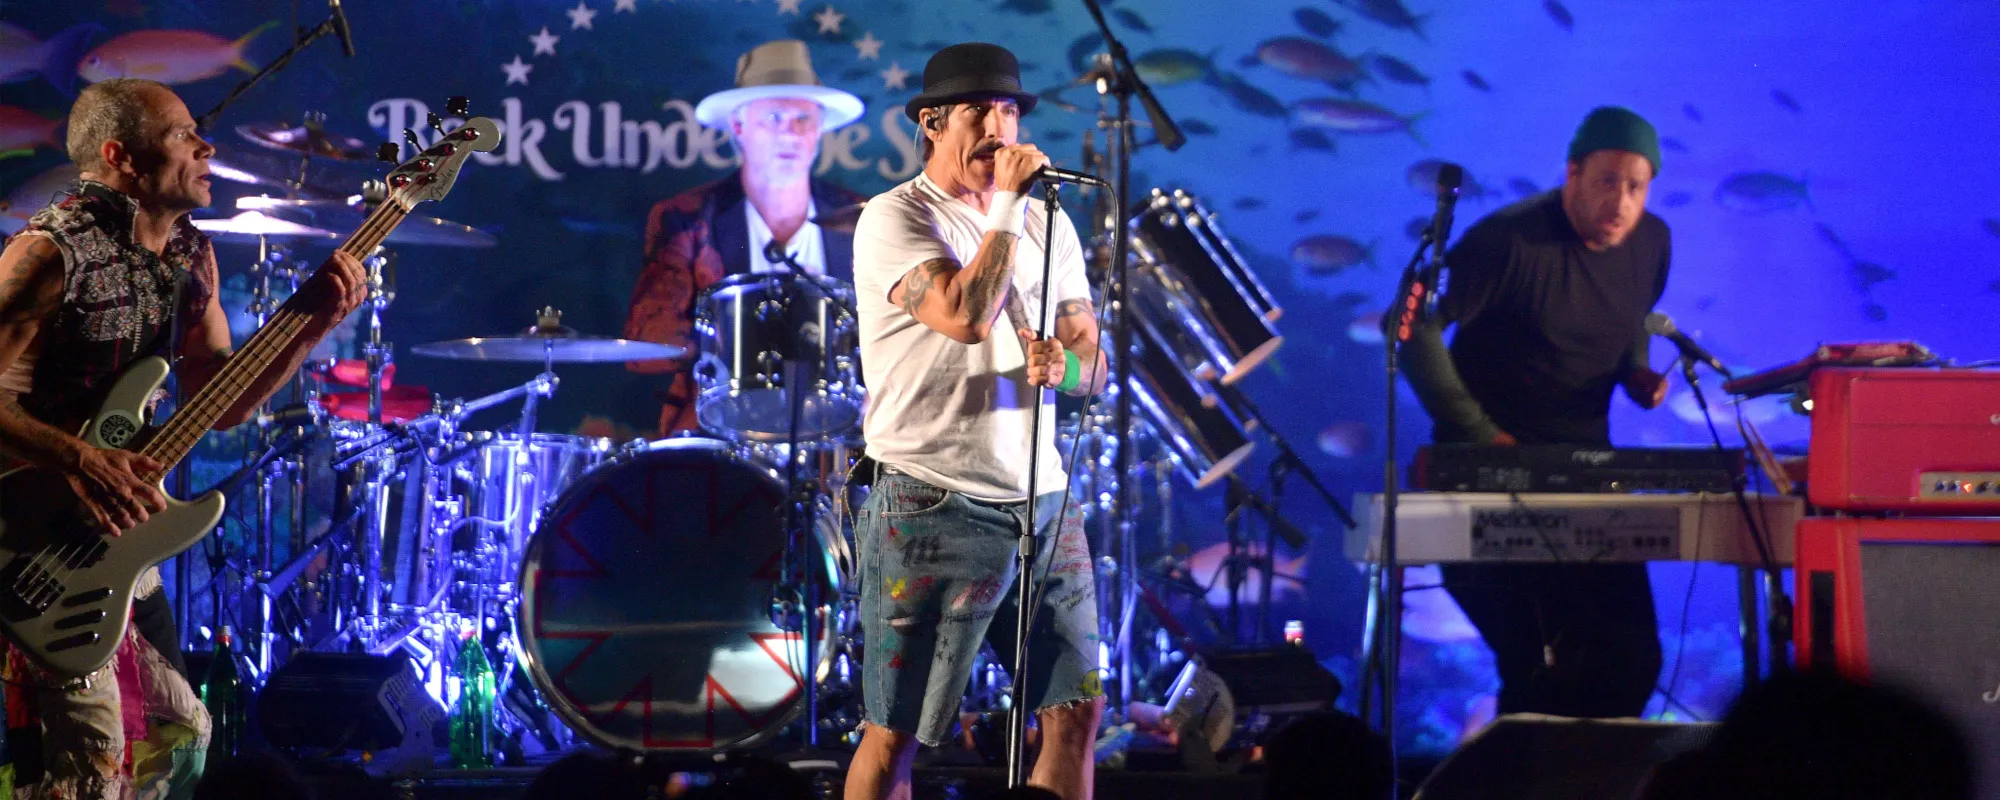 RHCP’s Anthony Kiedis Shares Songwriting Knowledge—”If You Don’t Practice, It May Never Come”